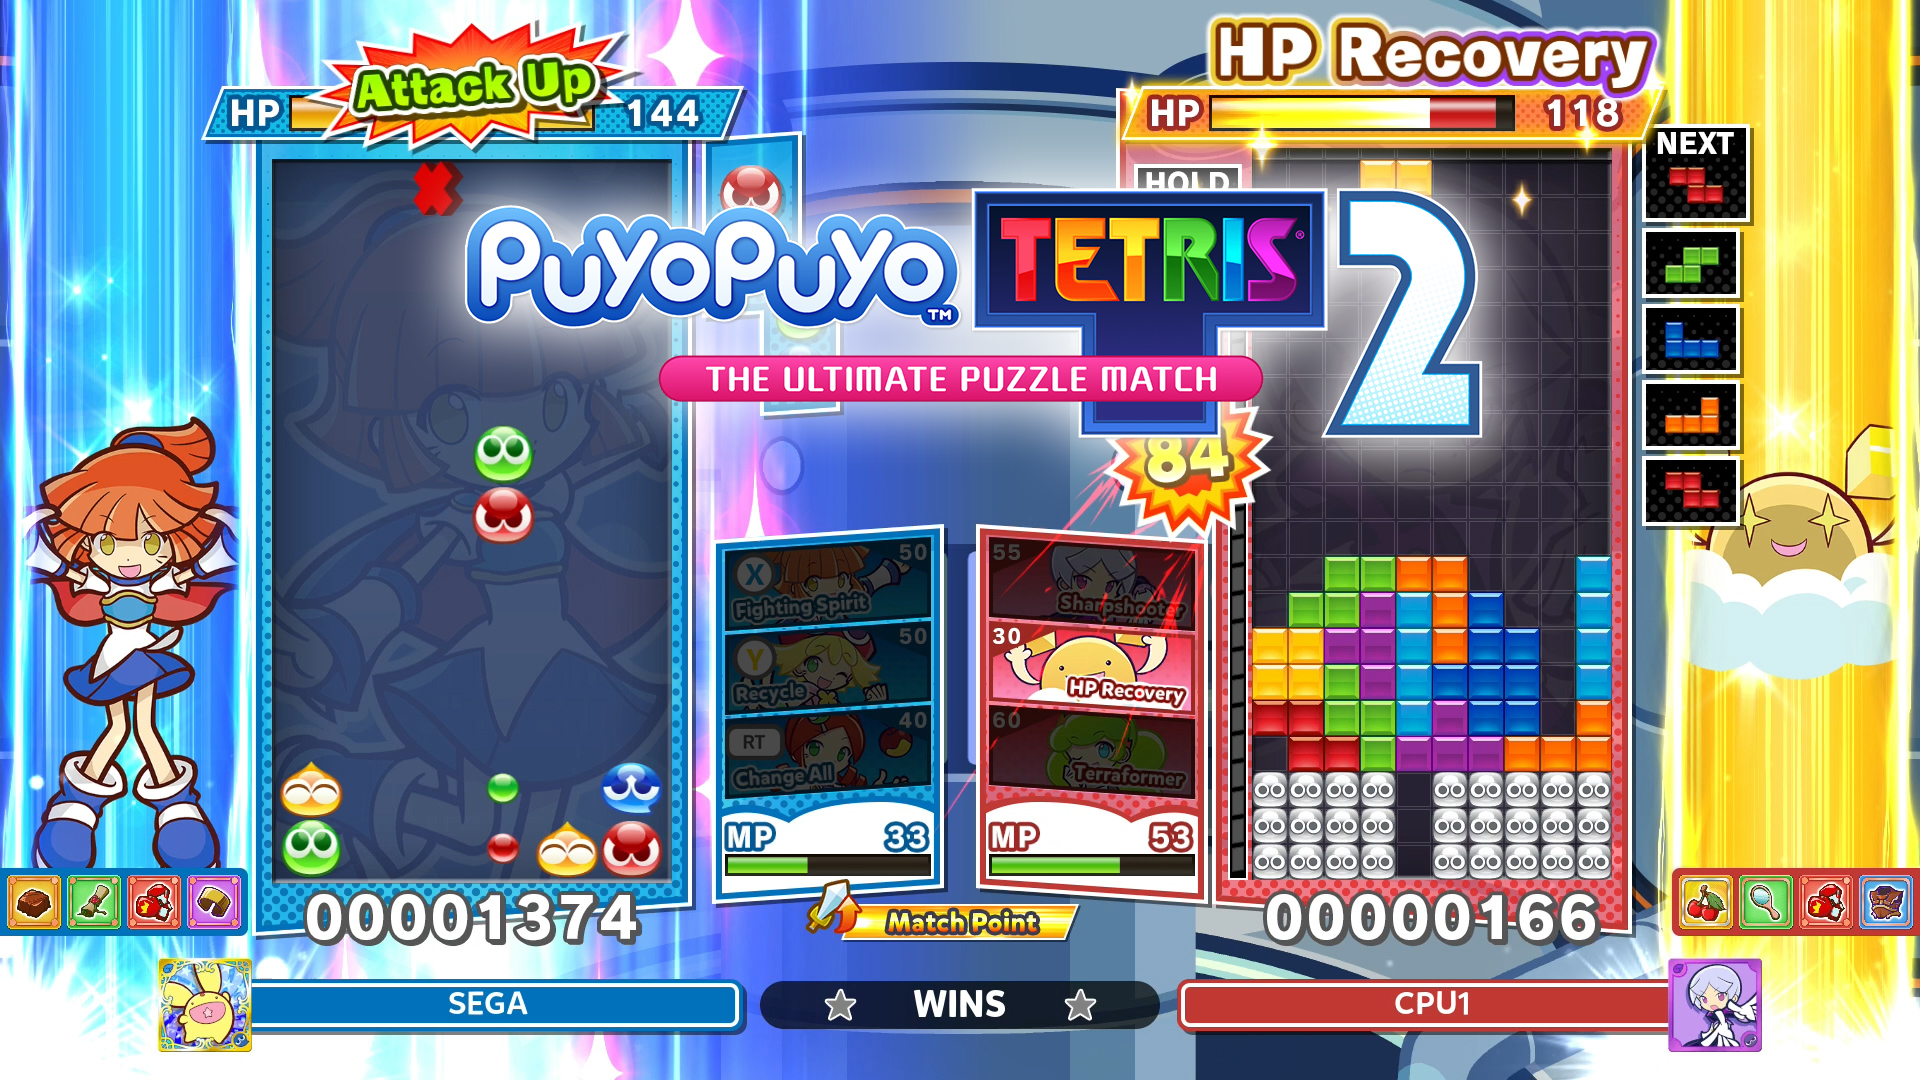 Video For Puyo Puyo Tetris 2 Launch Edition Is Now Available For Digital Pre-order And Pre-download On Xbox One